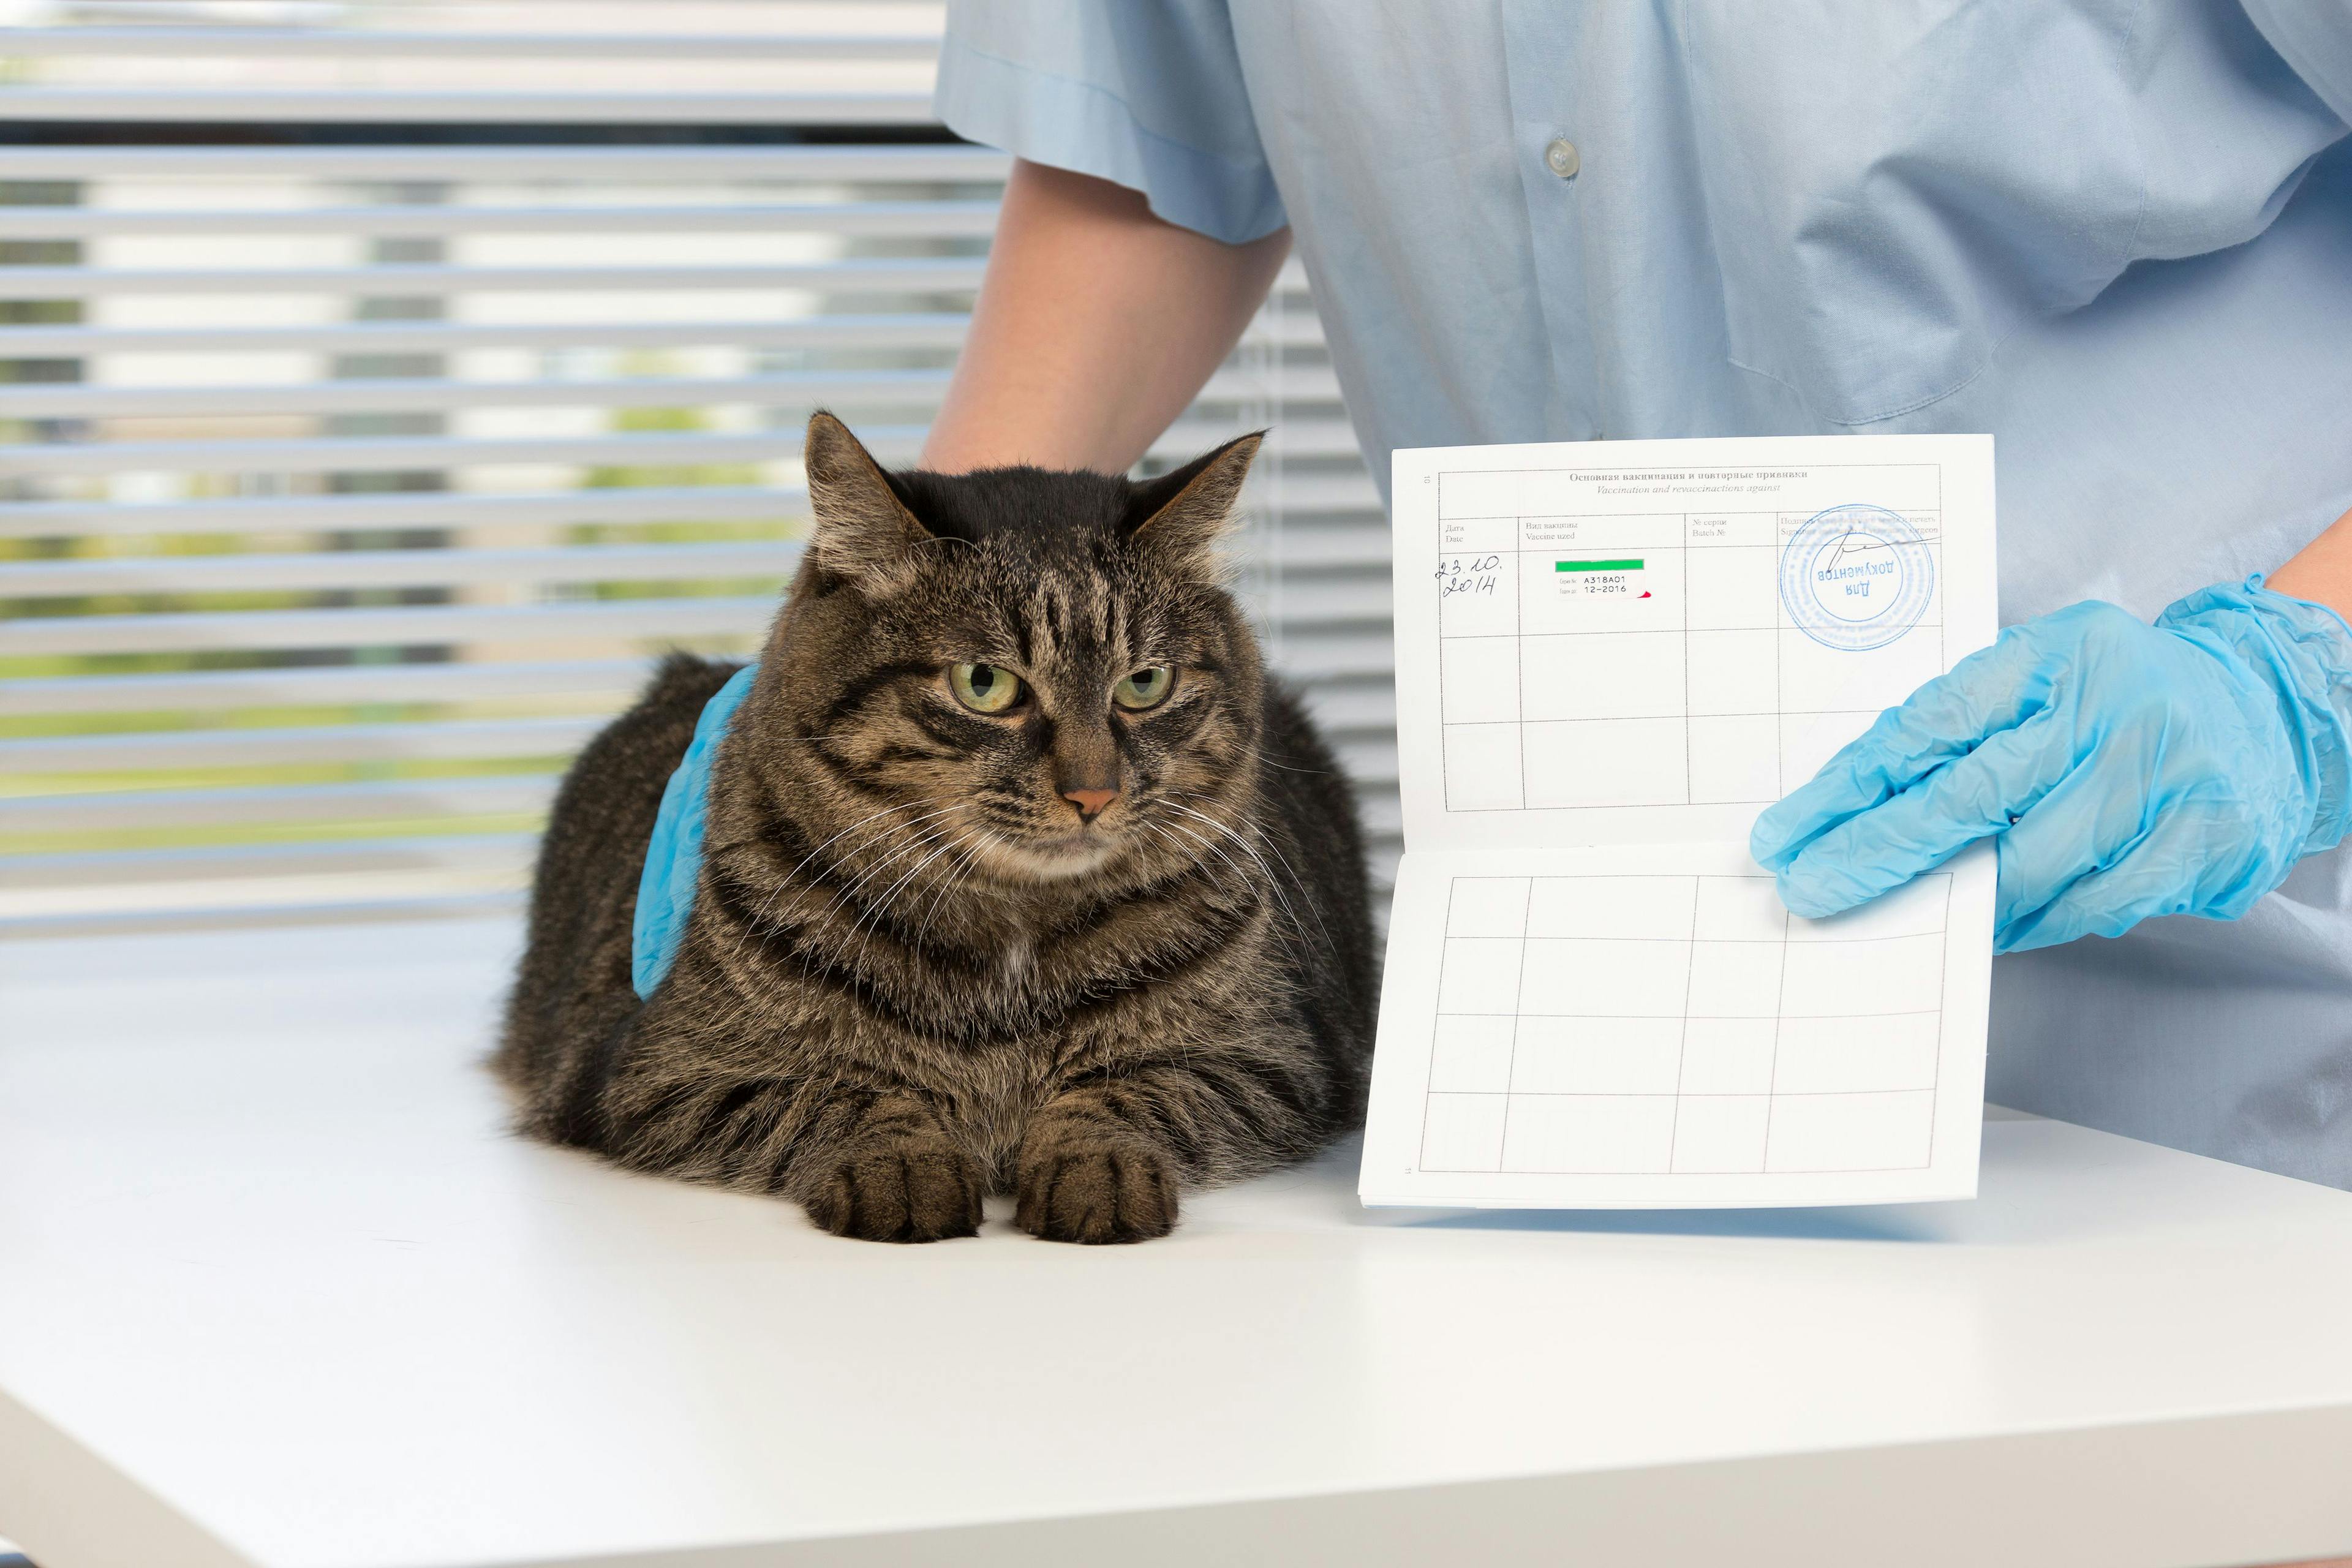 PetHub and Mella Pet Care collaborate to improve access to pet records